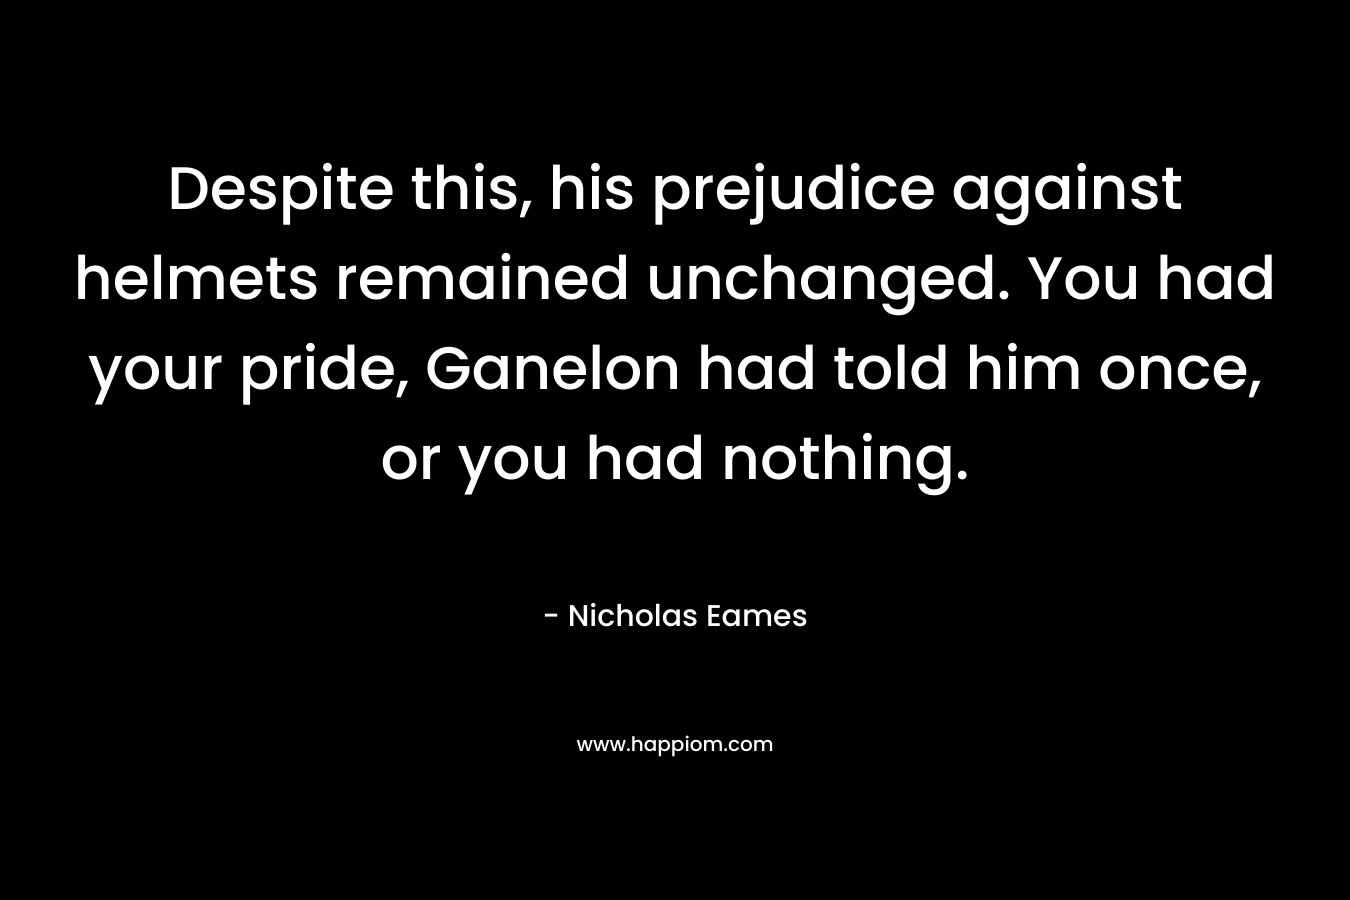 Despite this, his prejudice against helmets remained unchanged. You had your pride, Ganelon had told him once, or you had nothing. – Nicholas Eames